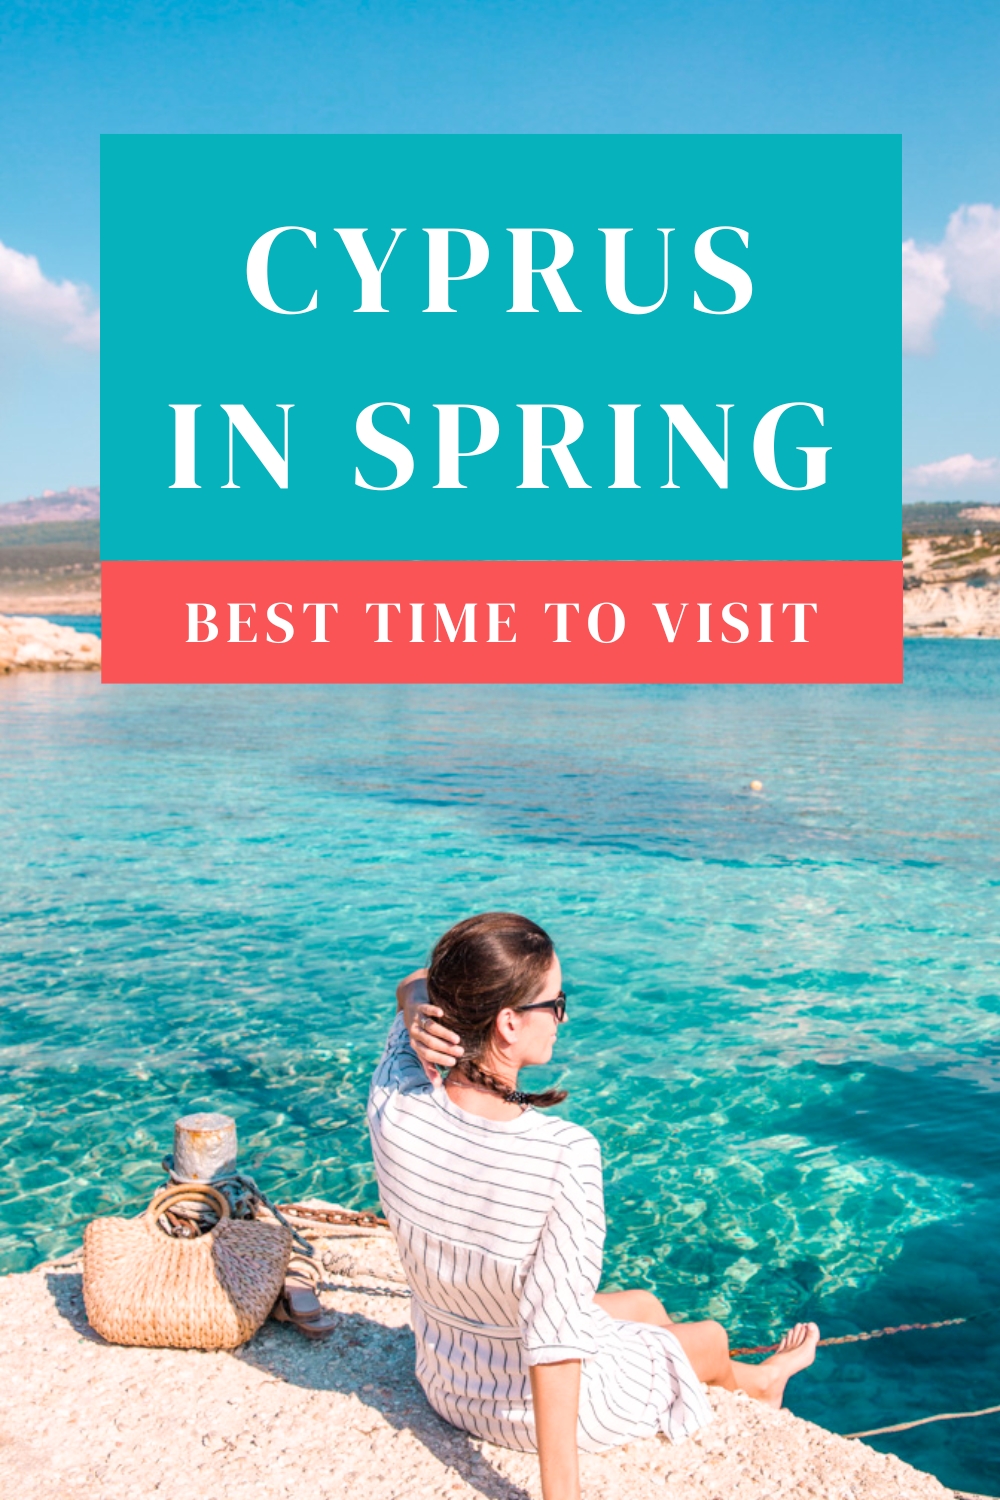 Cyprus in spring - best time to visit